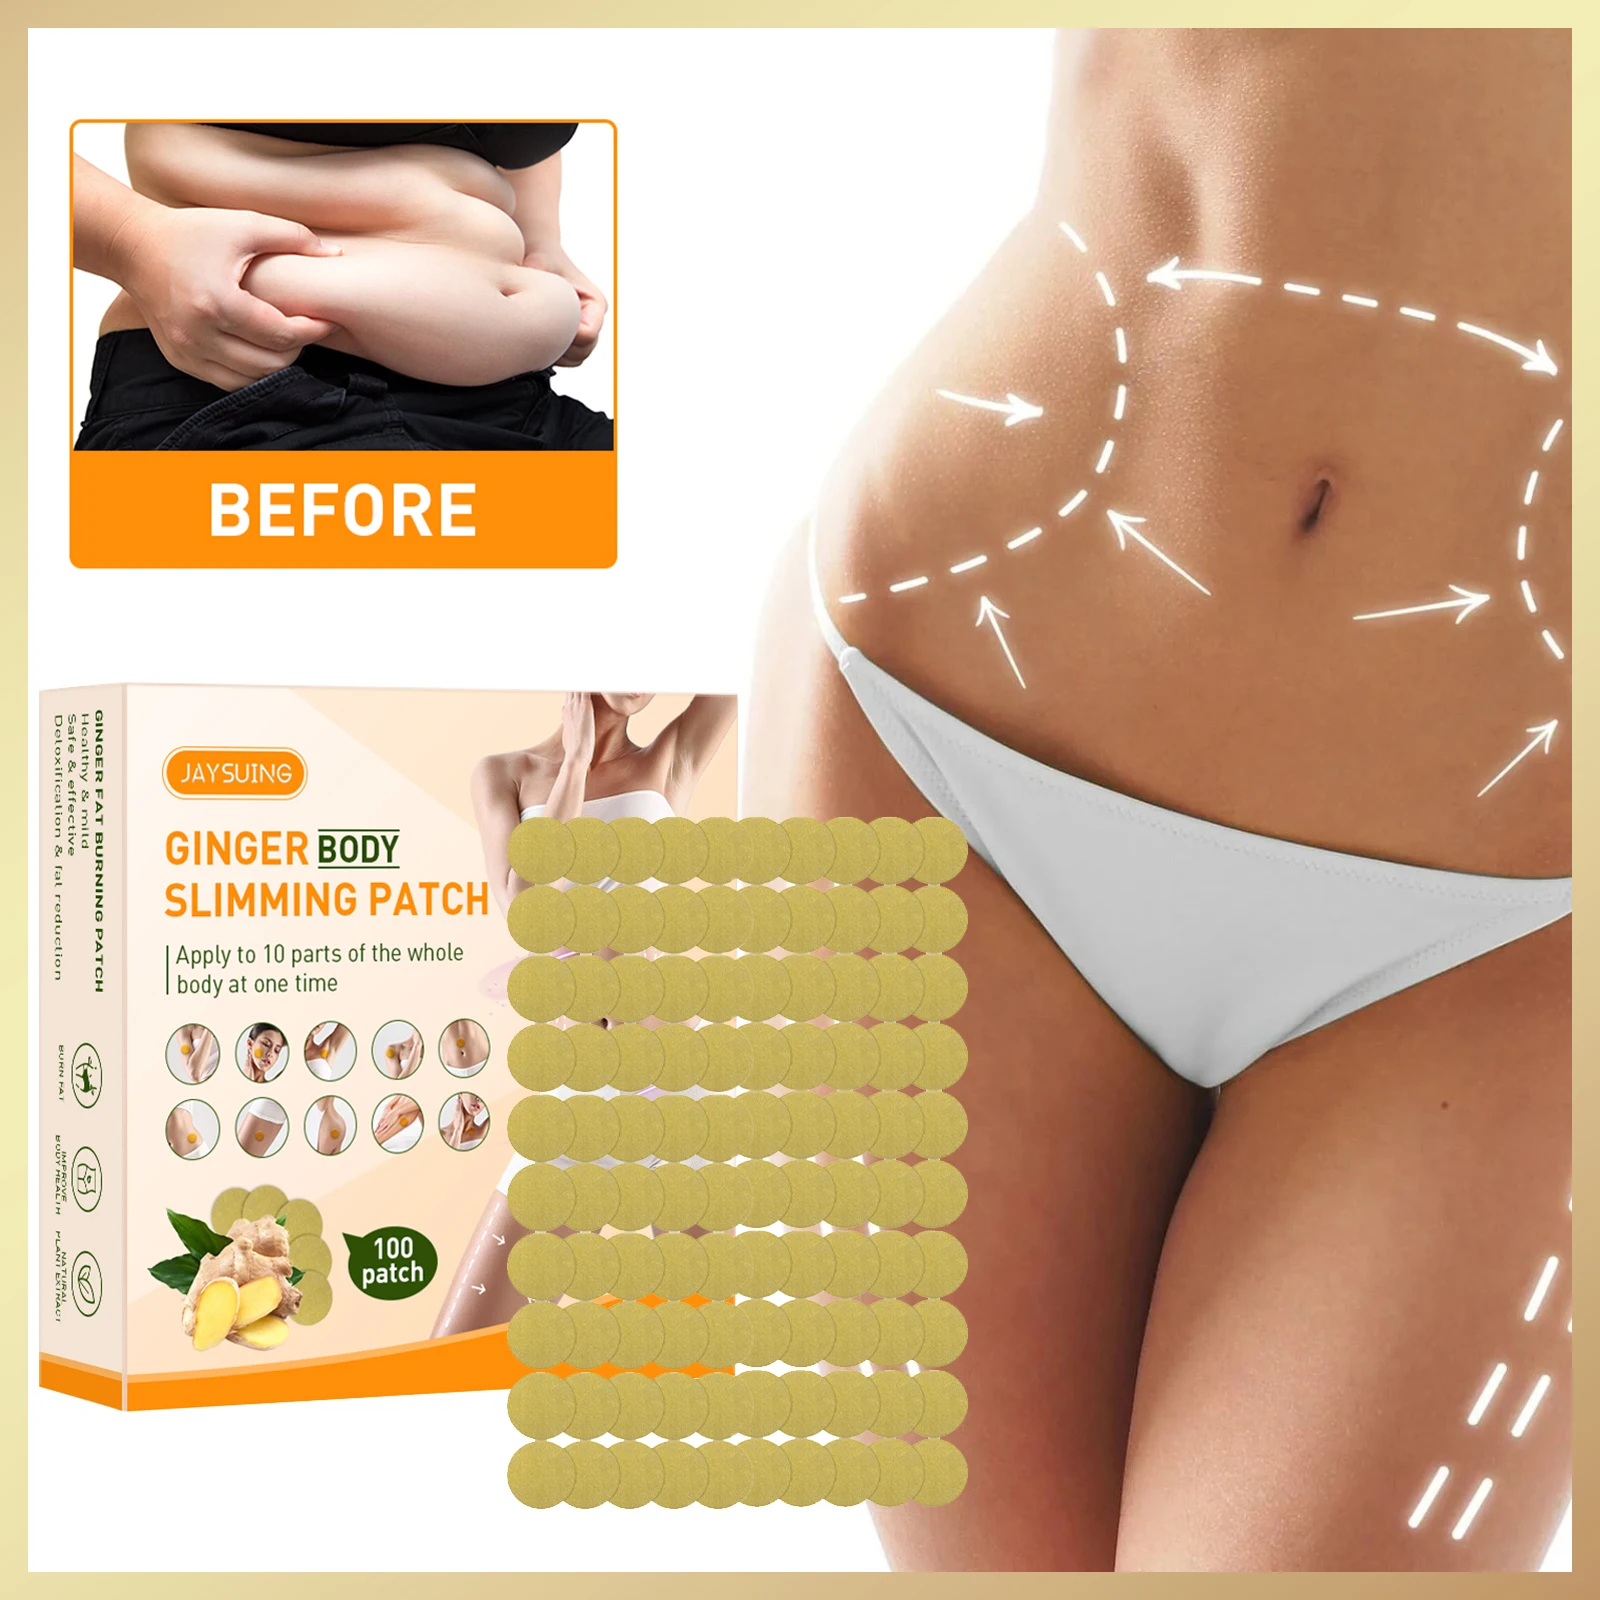 

Ginger Body Slimming Patchs Firming and Shaping To Reduce Belly and Thigh Weight Loss Fat Burning Product for Body 100Pcs/Set